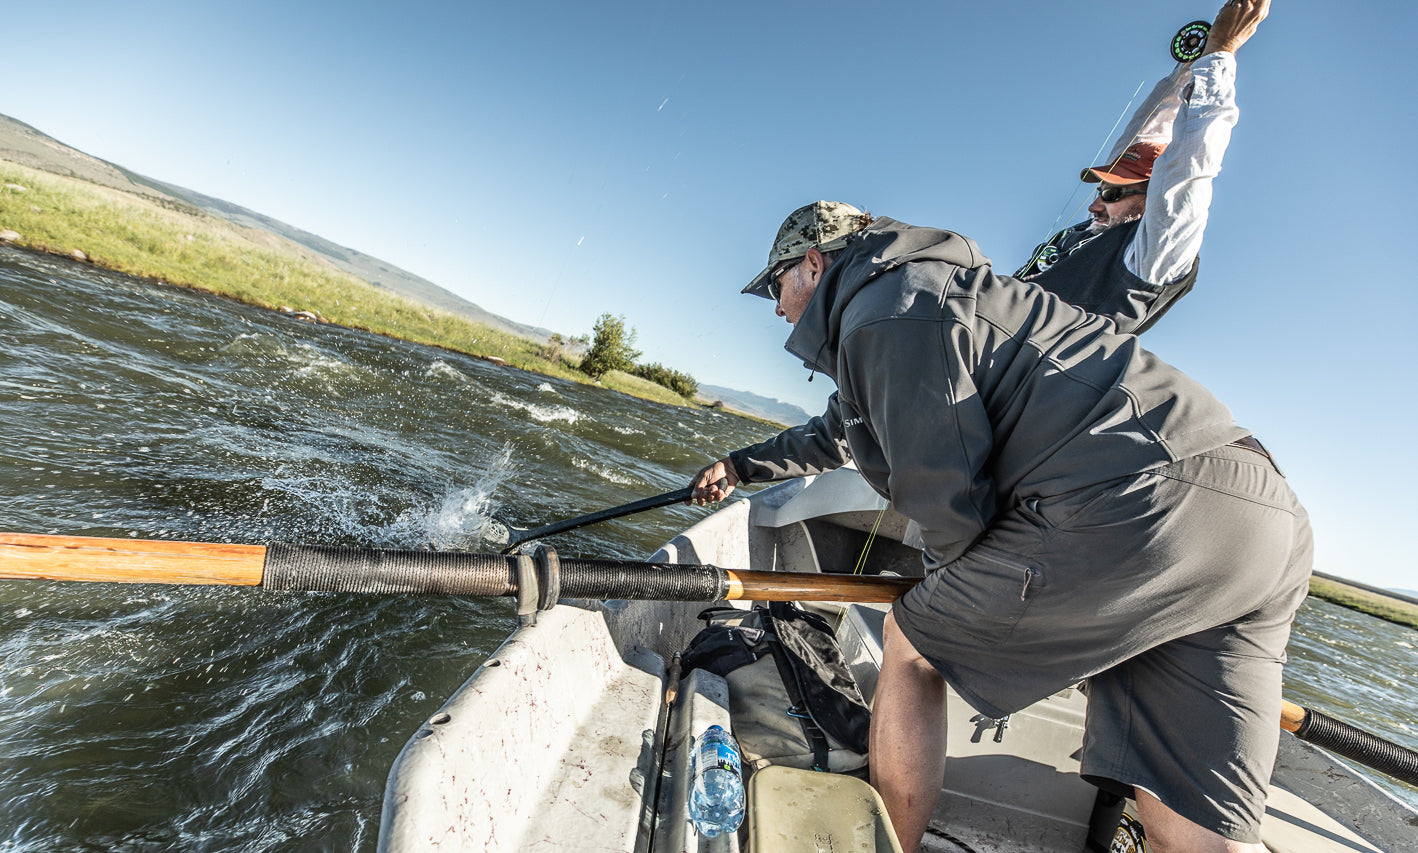 Fly Shop - Madison River Outfitters